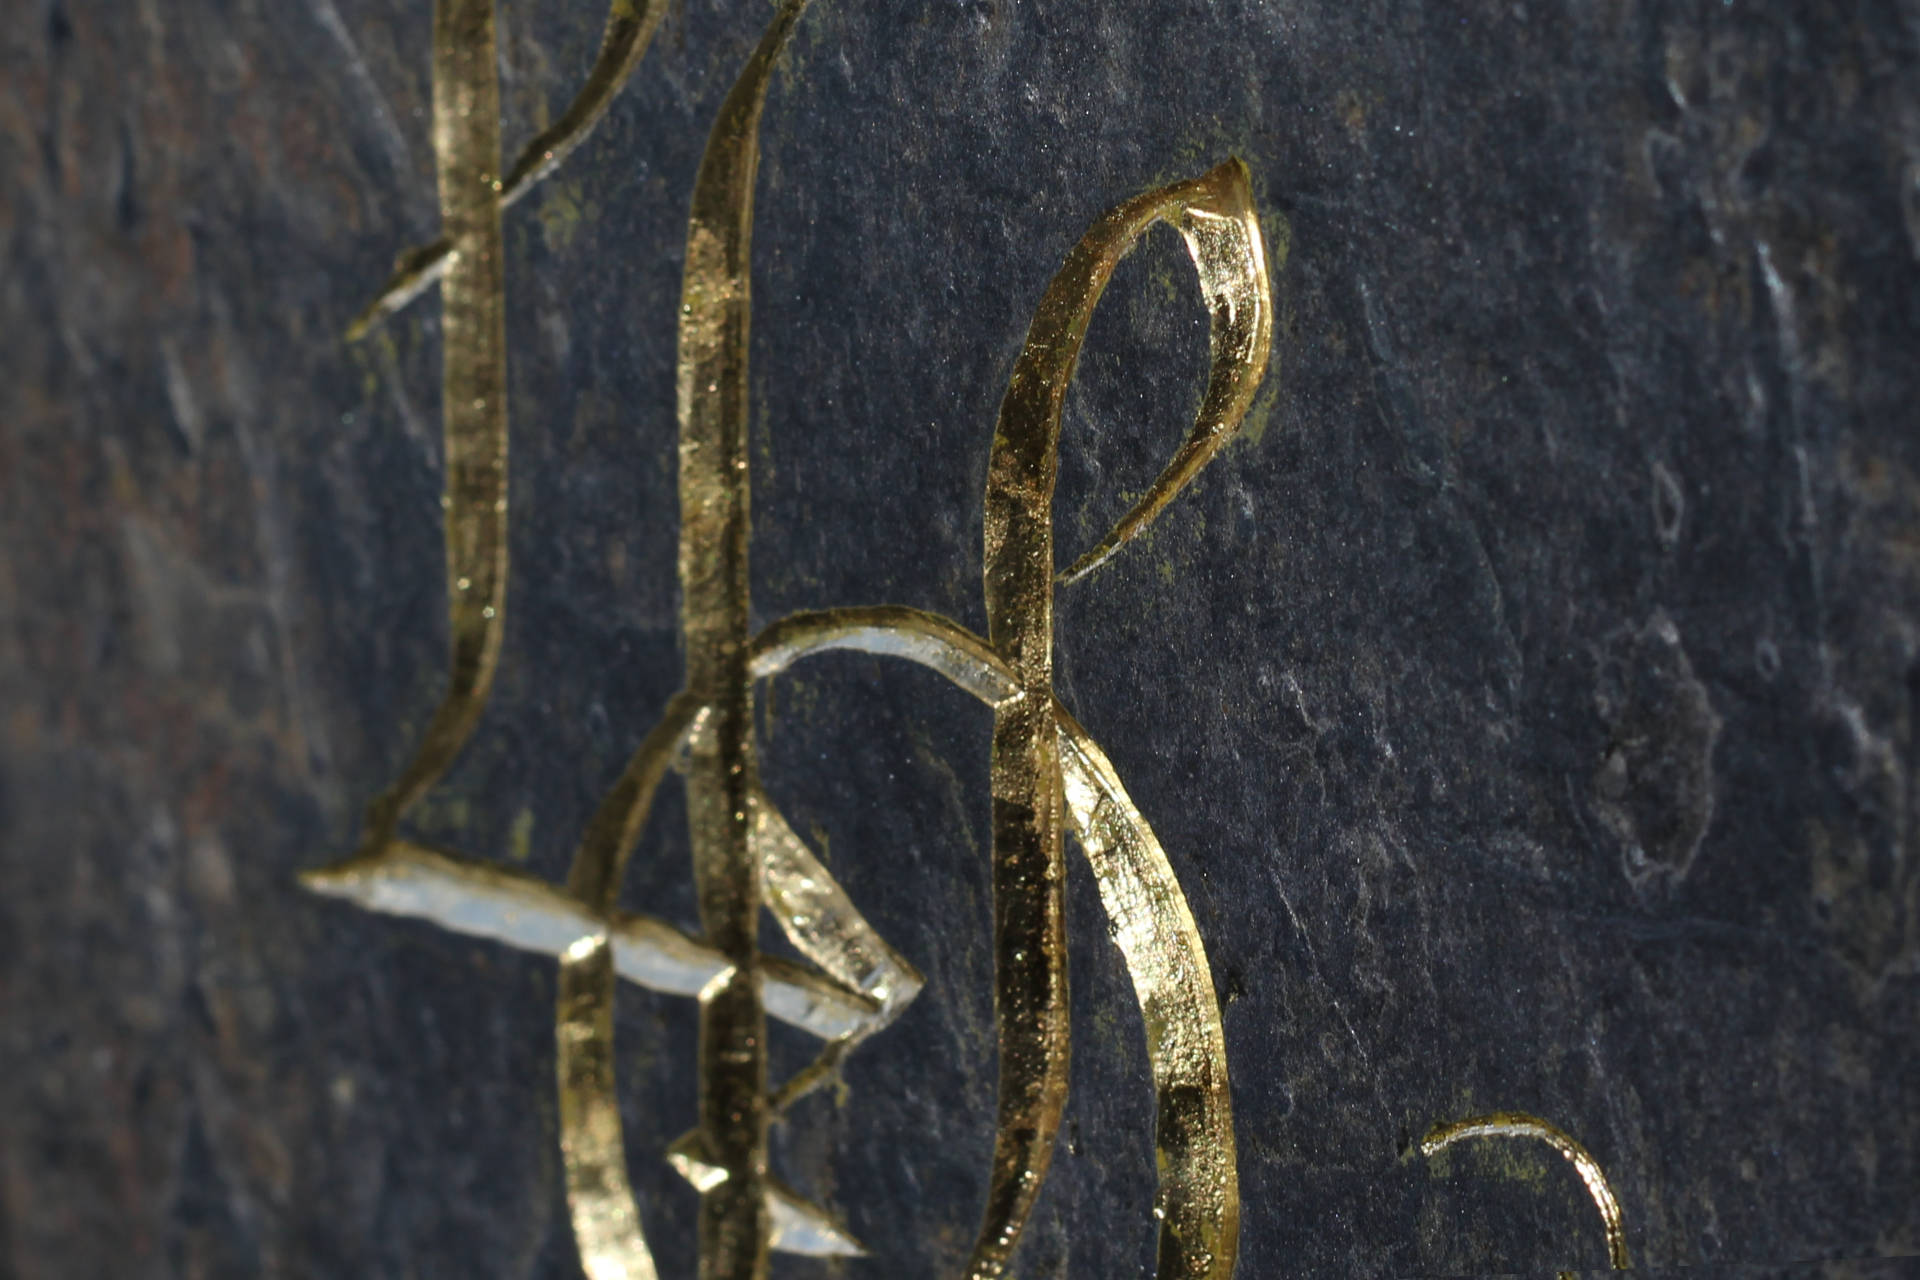 This is a close up image of the golden letters from the LOL acronym.